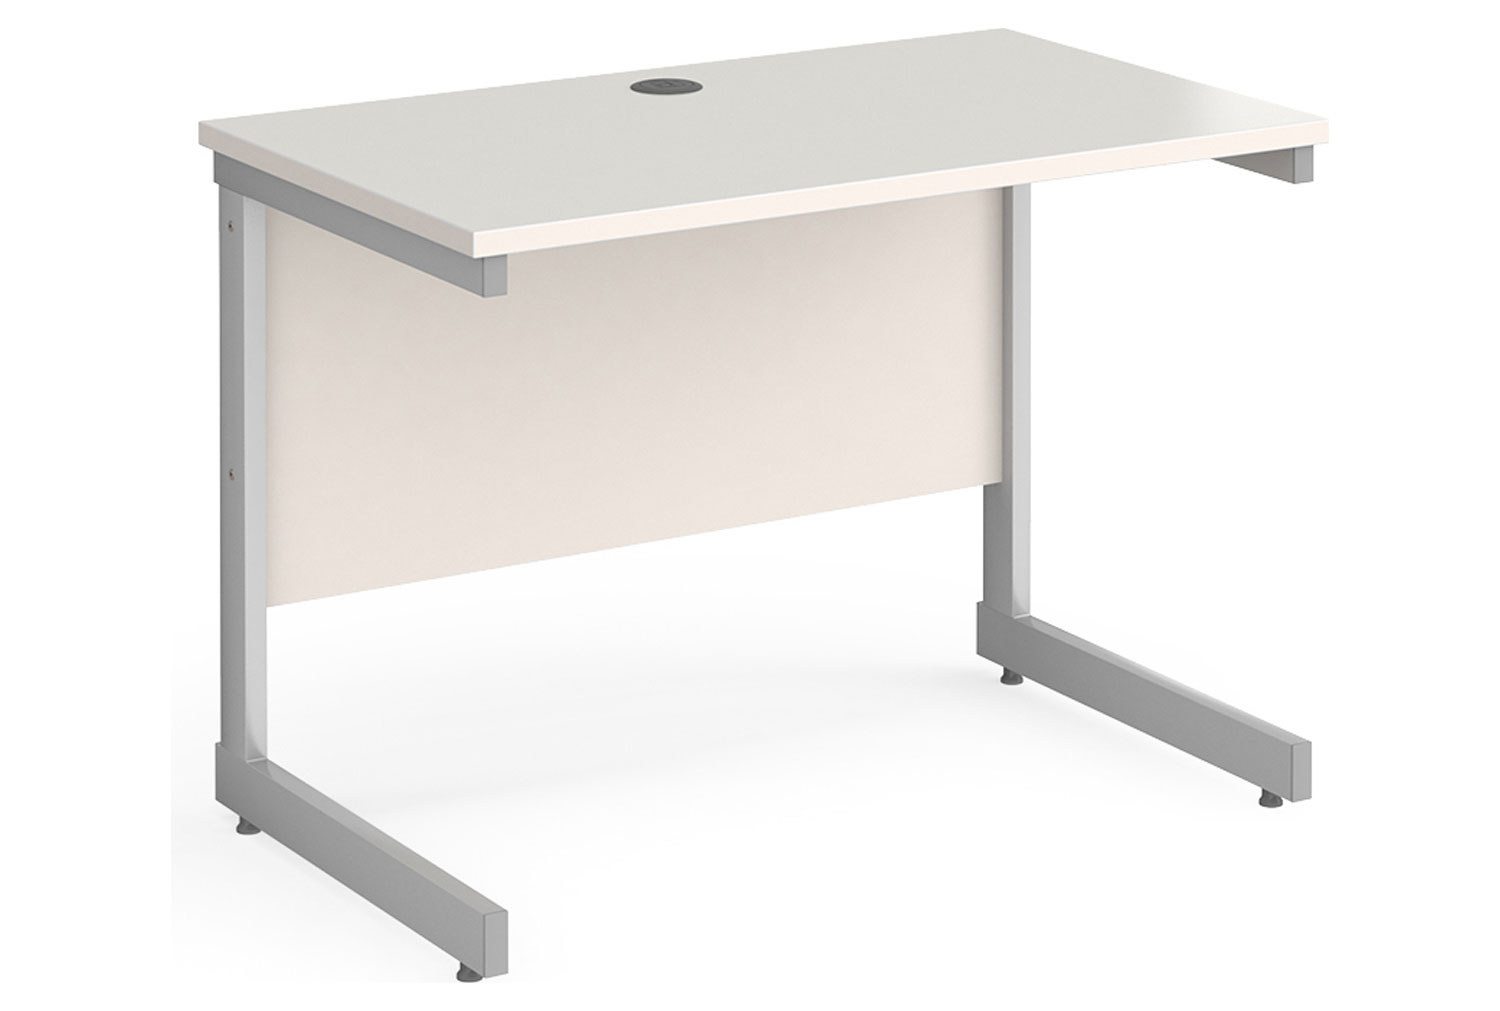 Thrifty Next-Day Narrow Rectangular Office Desk White, 100wx60dx73h (cm), Express Delivery